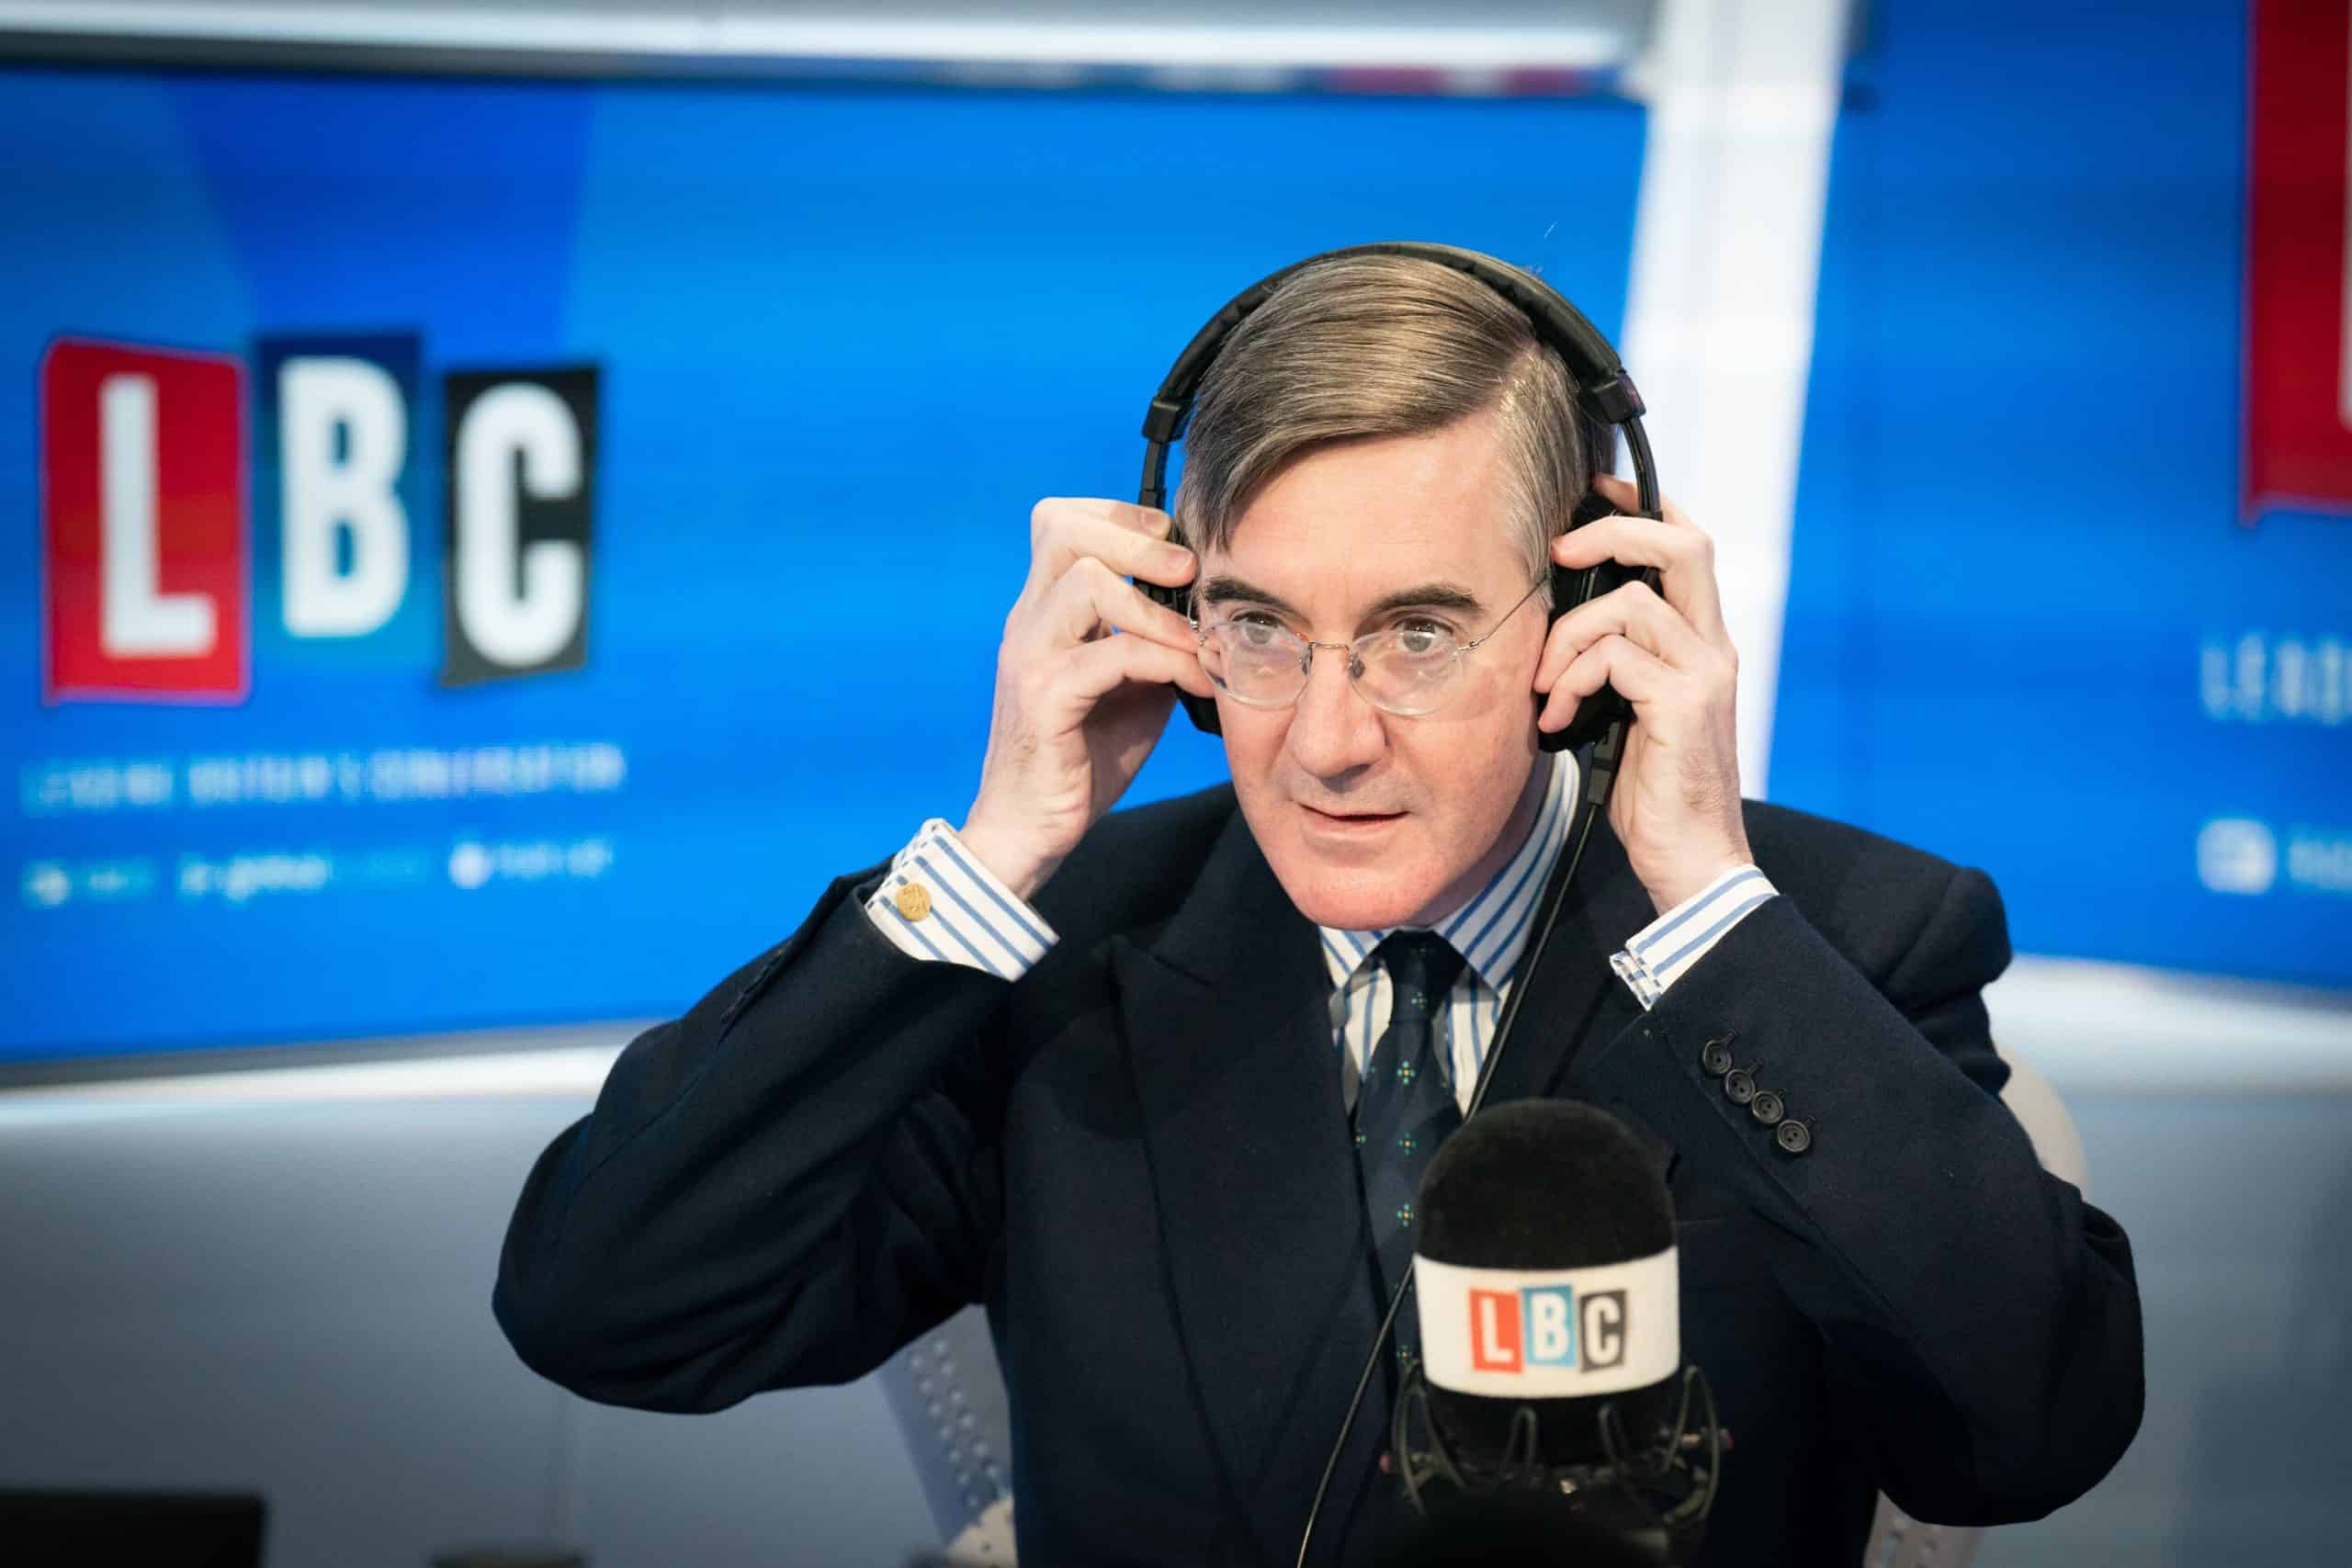 Mogg slammed for turning up to interview with four advisers as he plans to cut civil service